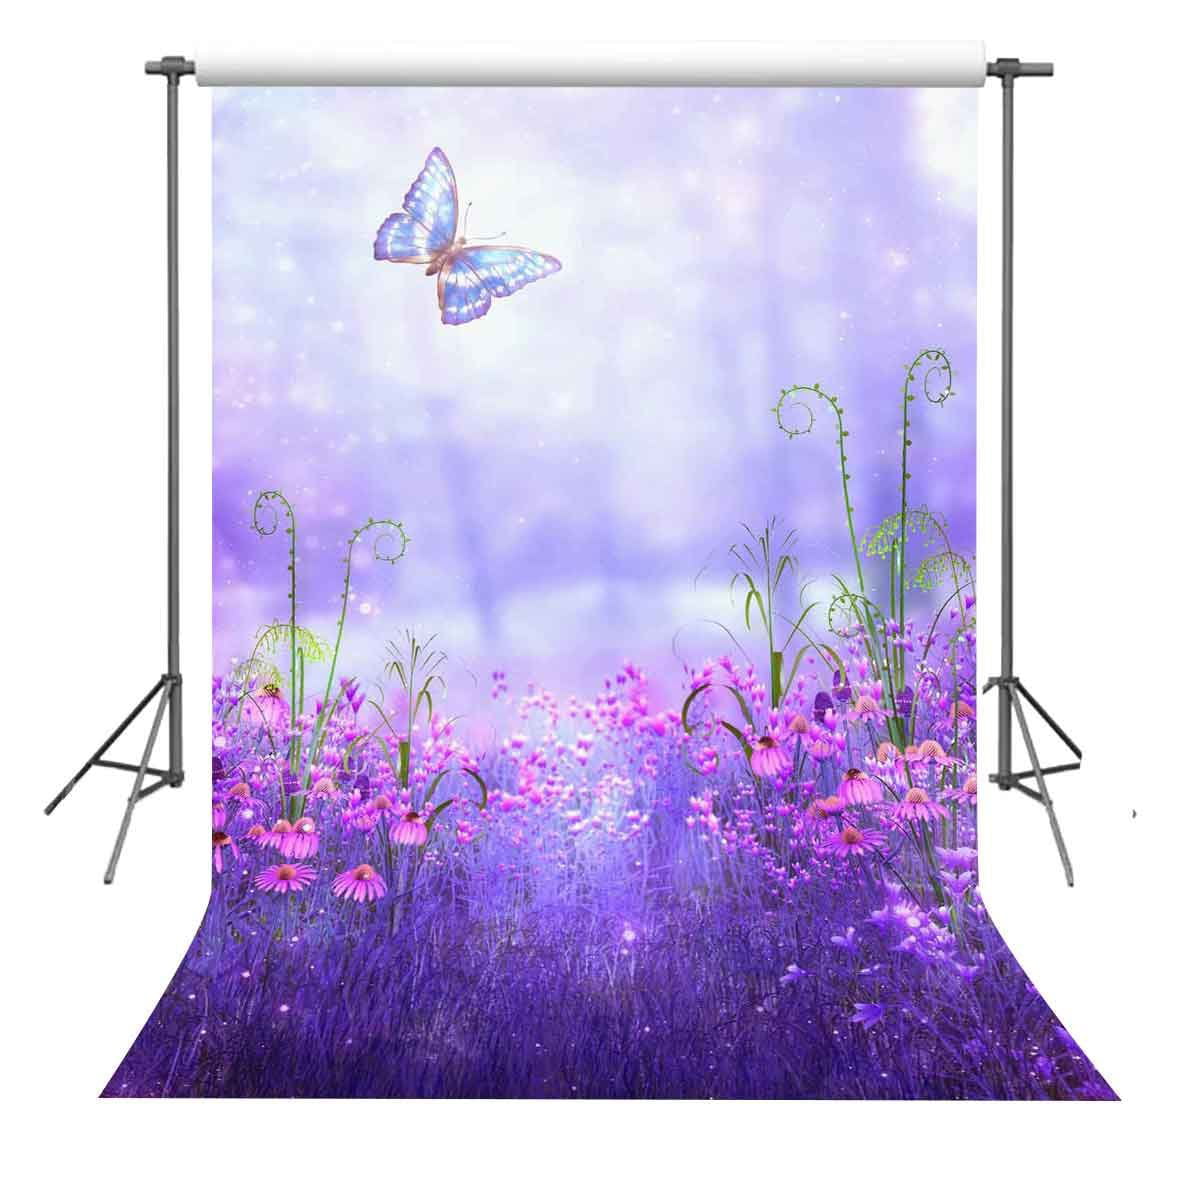 7x7FT Vinyl Photography Backdrop,Abstract,Butterflies Floral Photo Background for Photo Booth Studio Props 